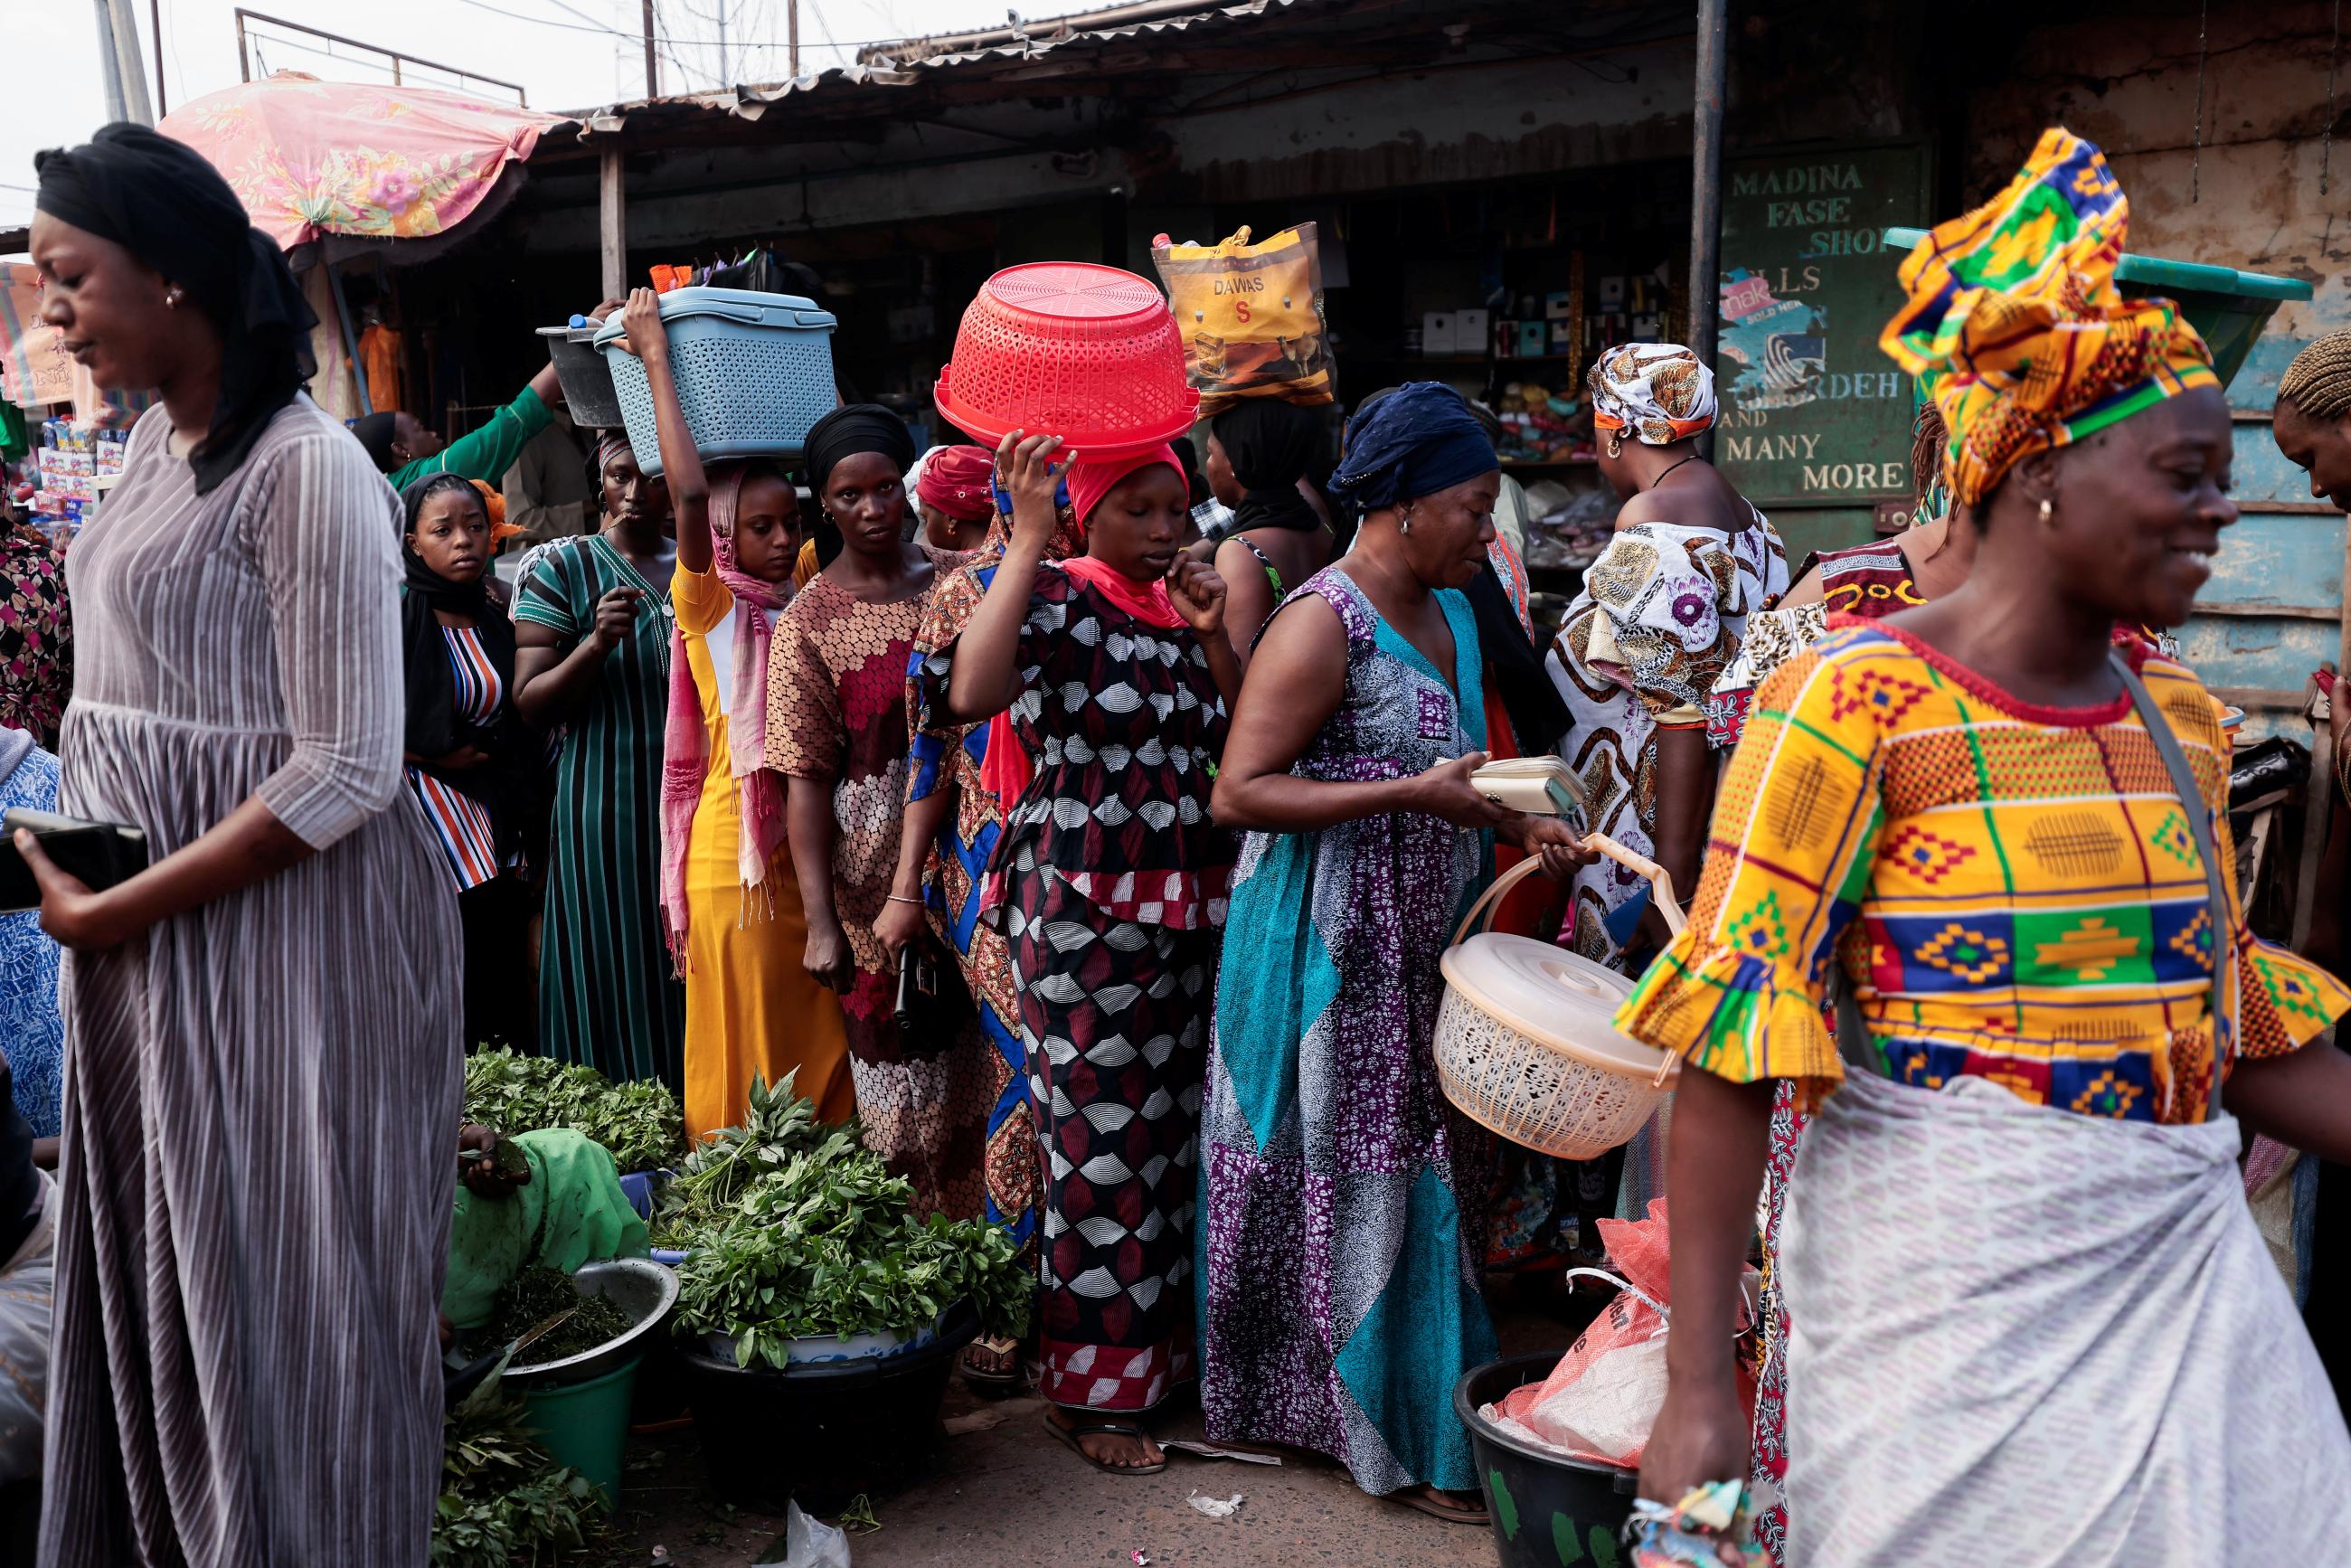 Women shop at a street market ahead of the presidential election in Banjul, Gambia, December 3, 2021.